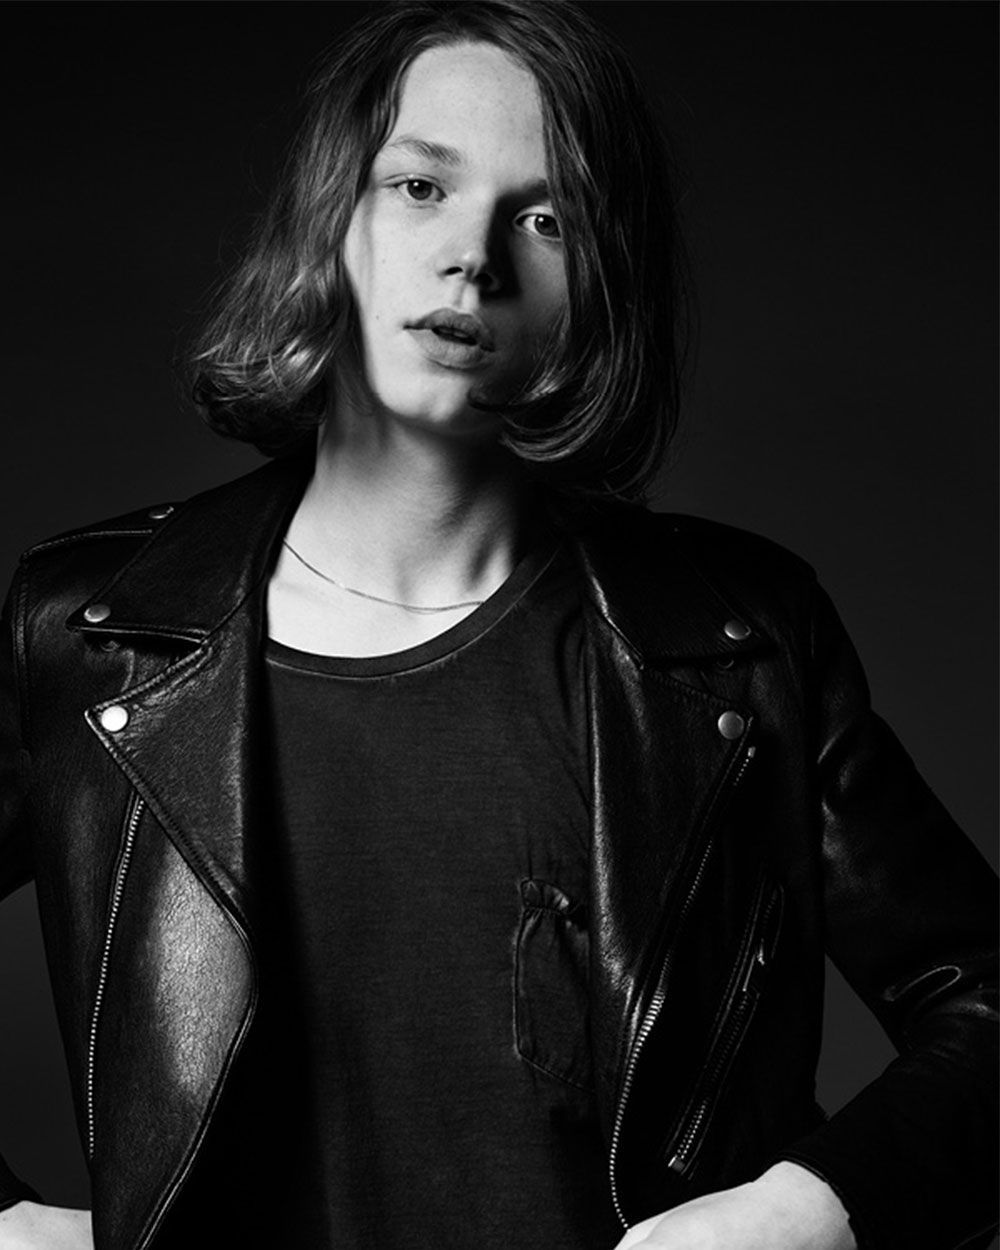 Jack Kilmer also stars in Saint Laurent's The Permanent Collection campaign. Photo / YSL.com